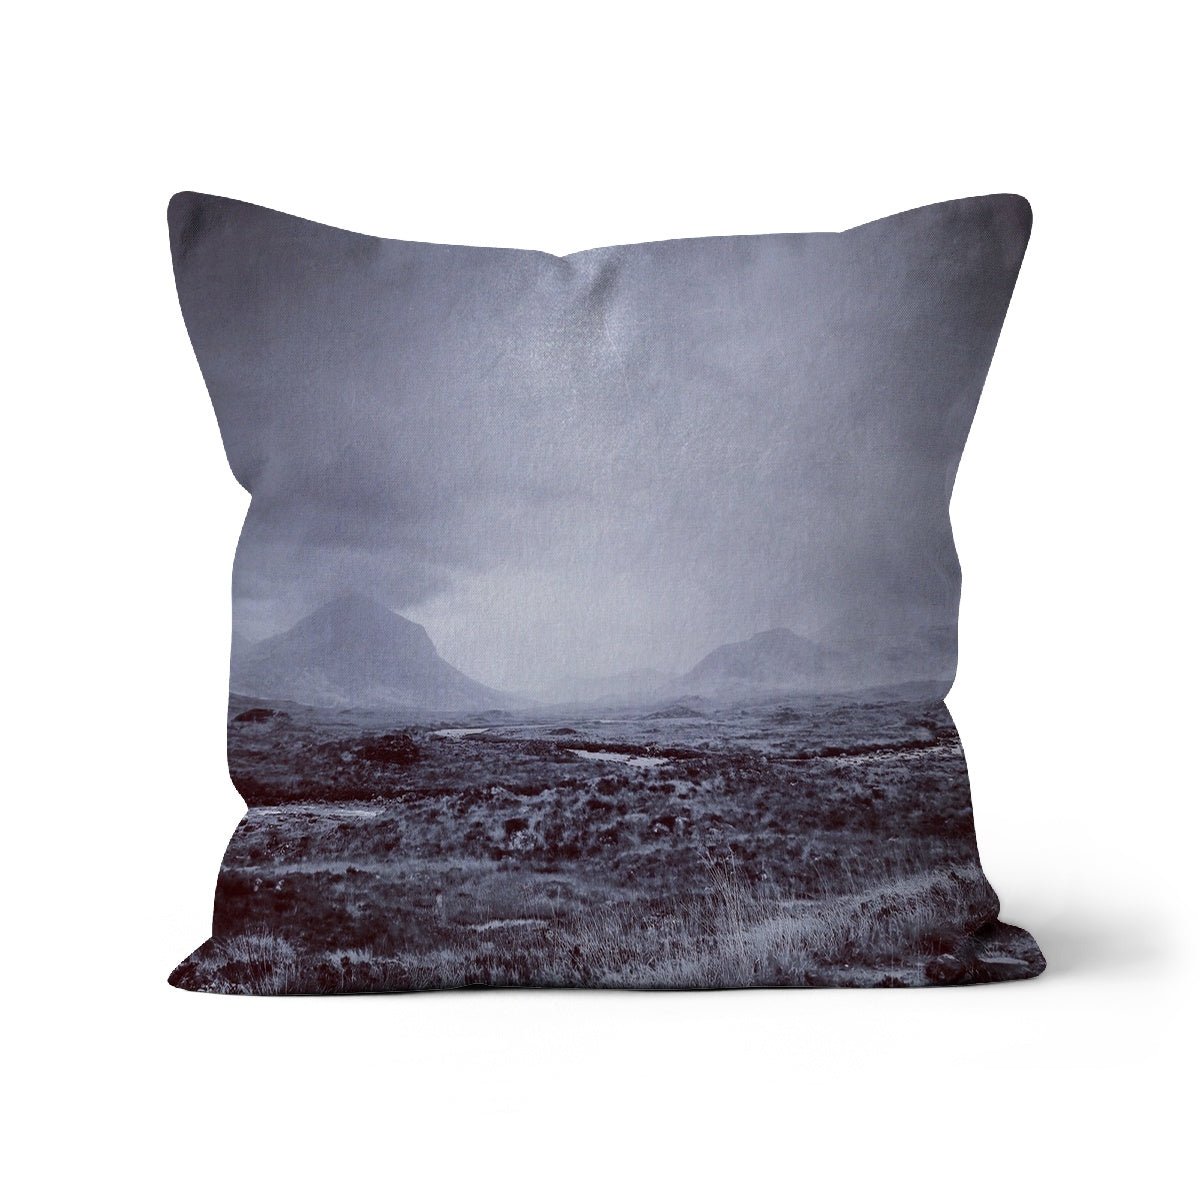 The Brooding Cuillin Skye Art Gifts Cushion-Cushions-Skye Art Gallery-Canvas-22"x22"-Paintings, Prints, Homeware, Art Gifts From Scotland By Scottish Artist Kevin Hunter